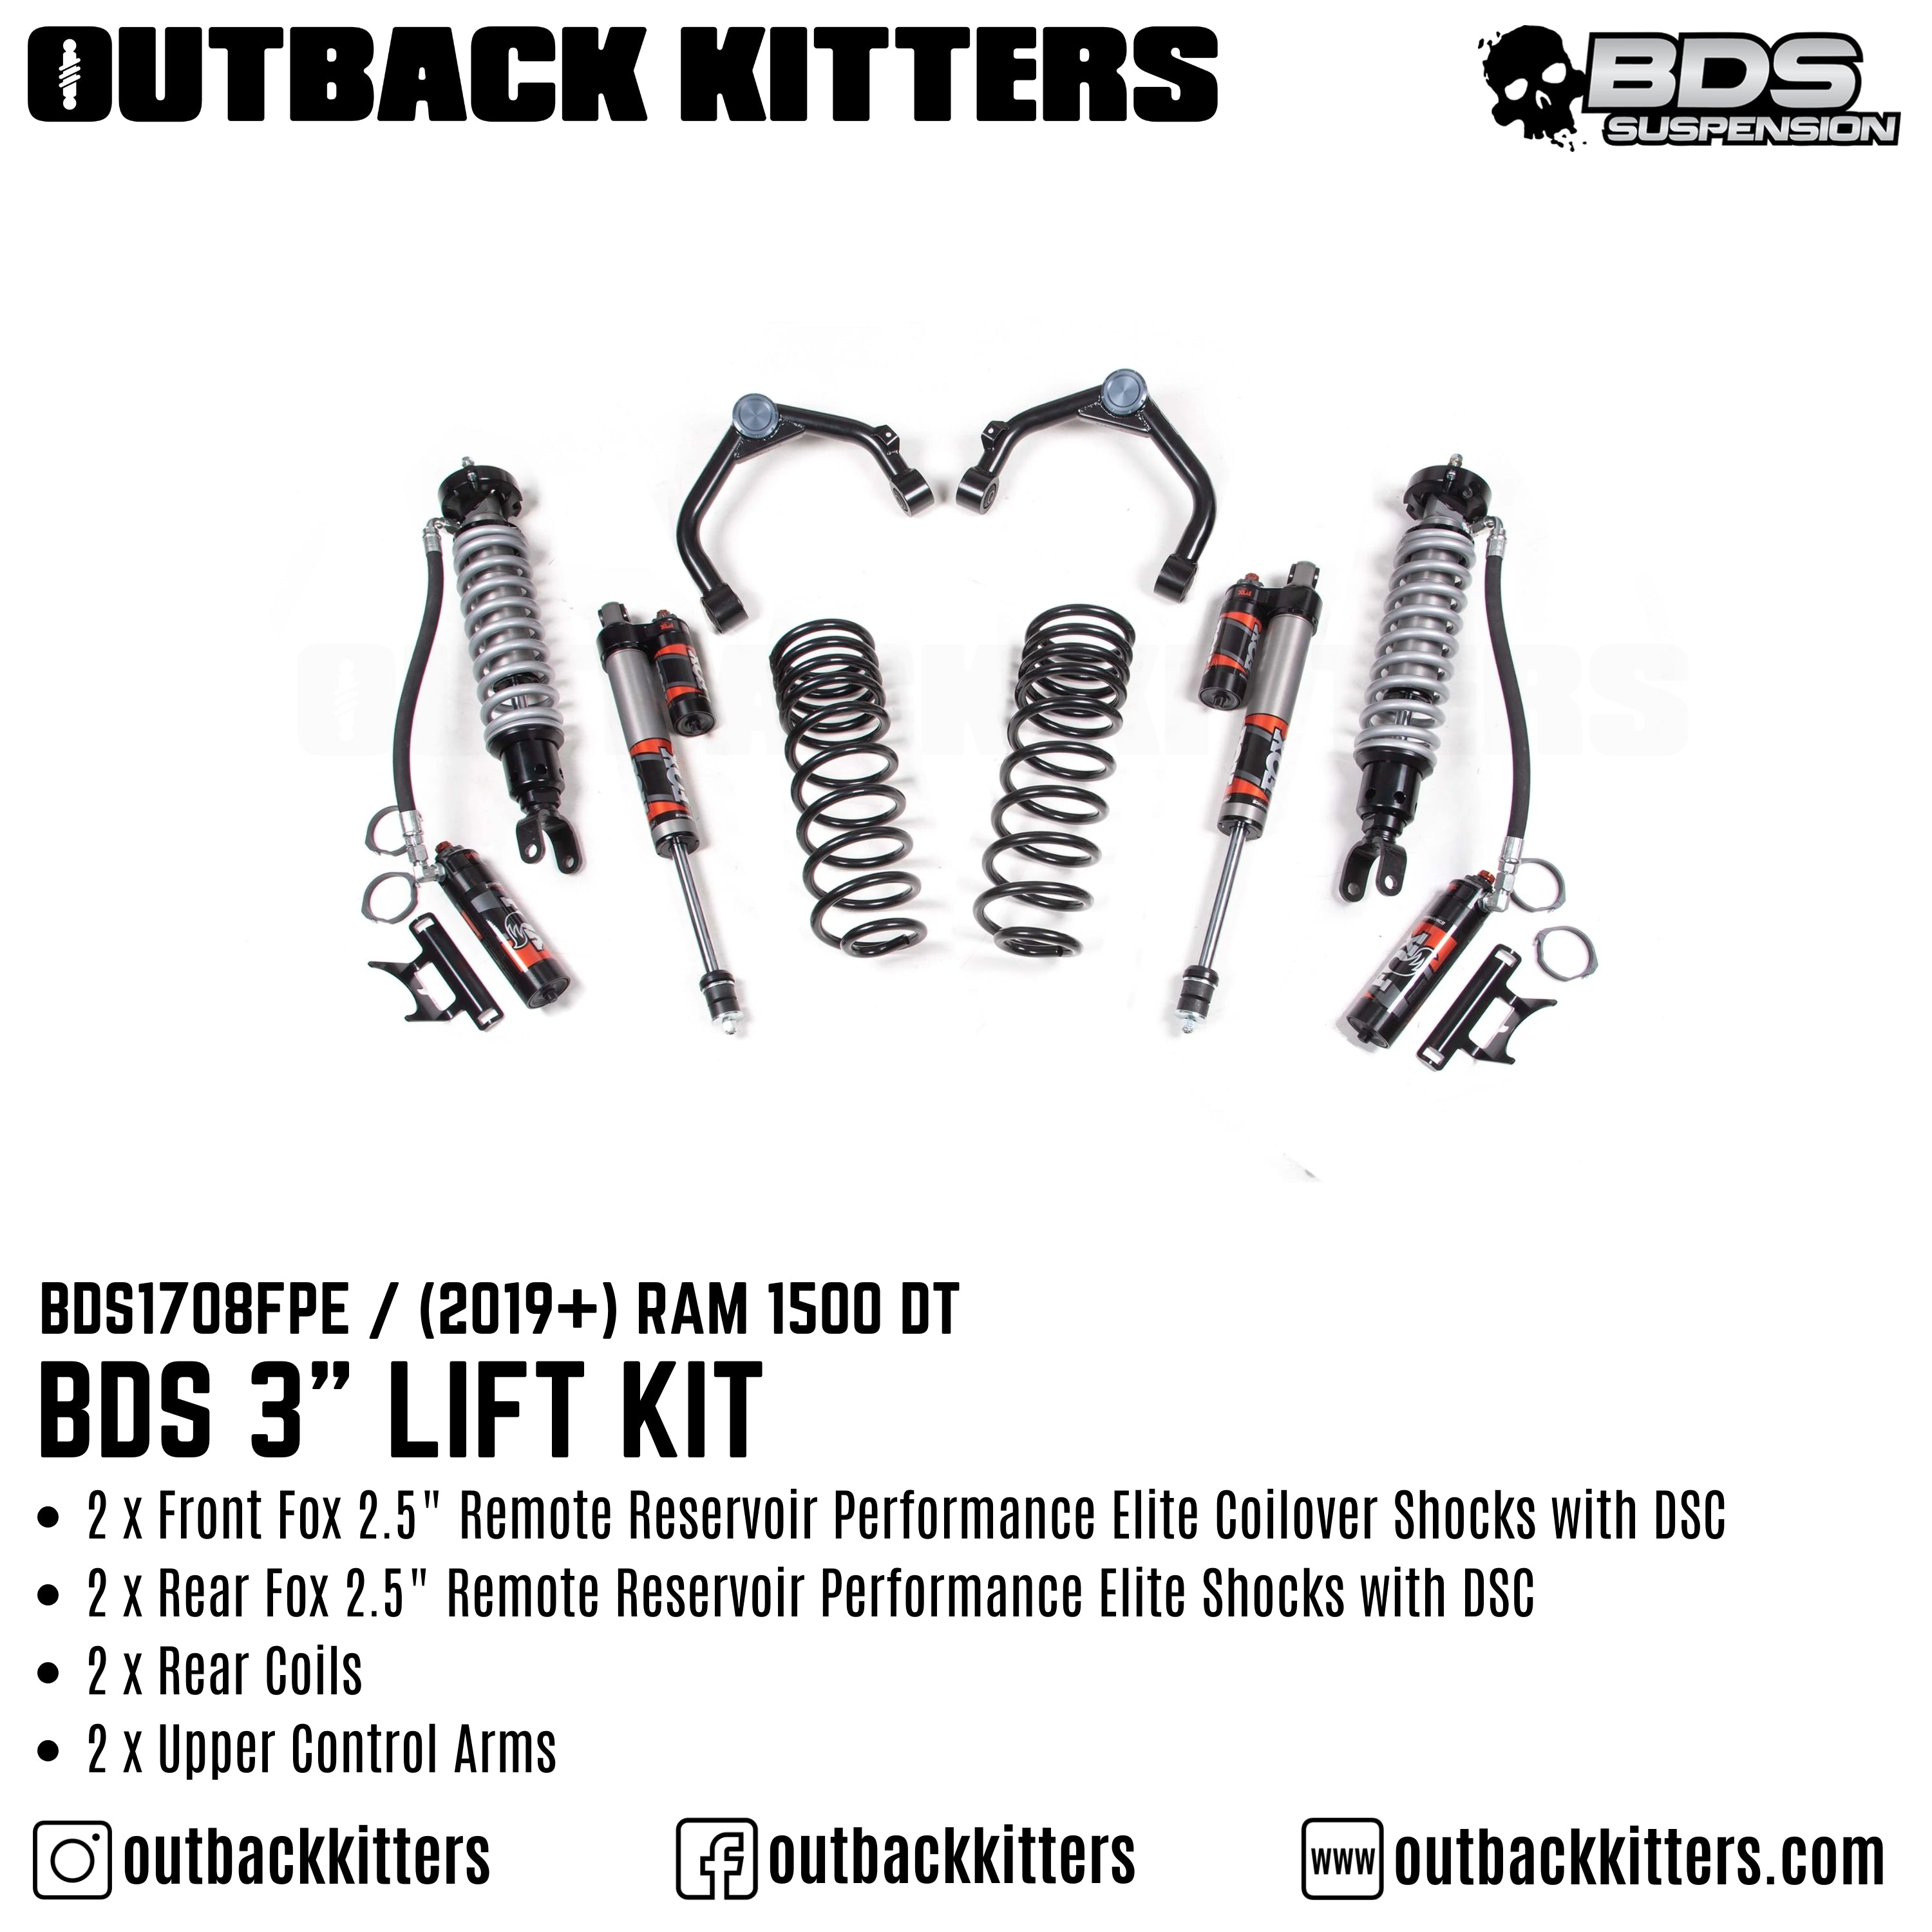 BDS Suspension 3" Lift Kit for Ram 1500 DT with Fox 2.5 Performance Elite Shocks - Outback Kitters